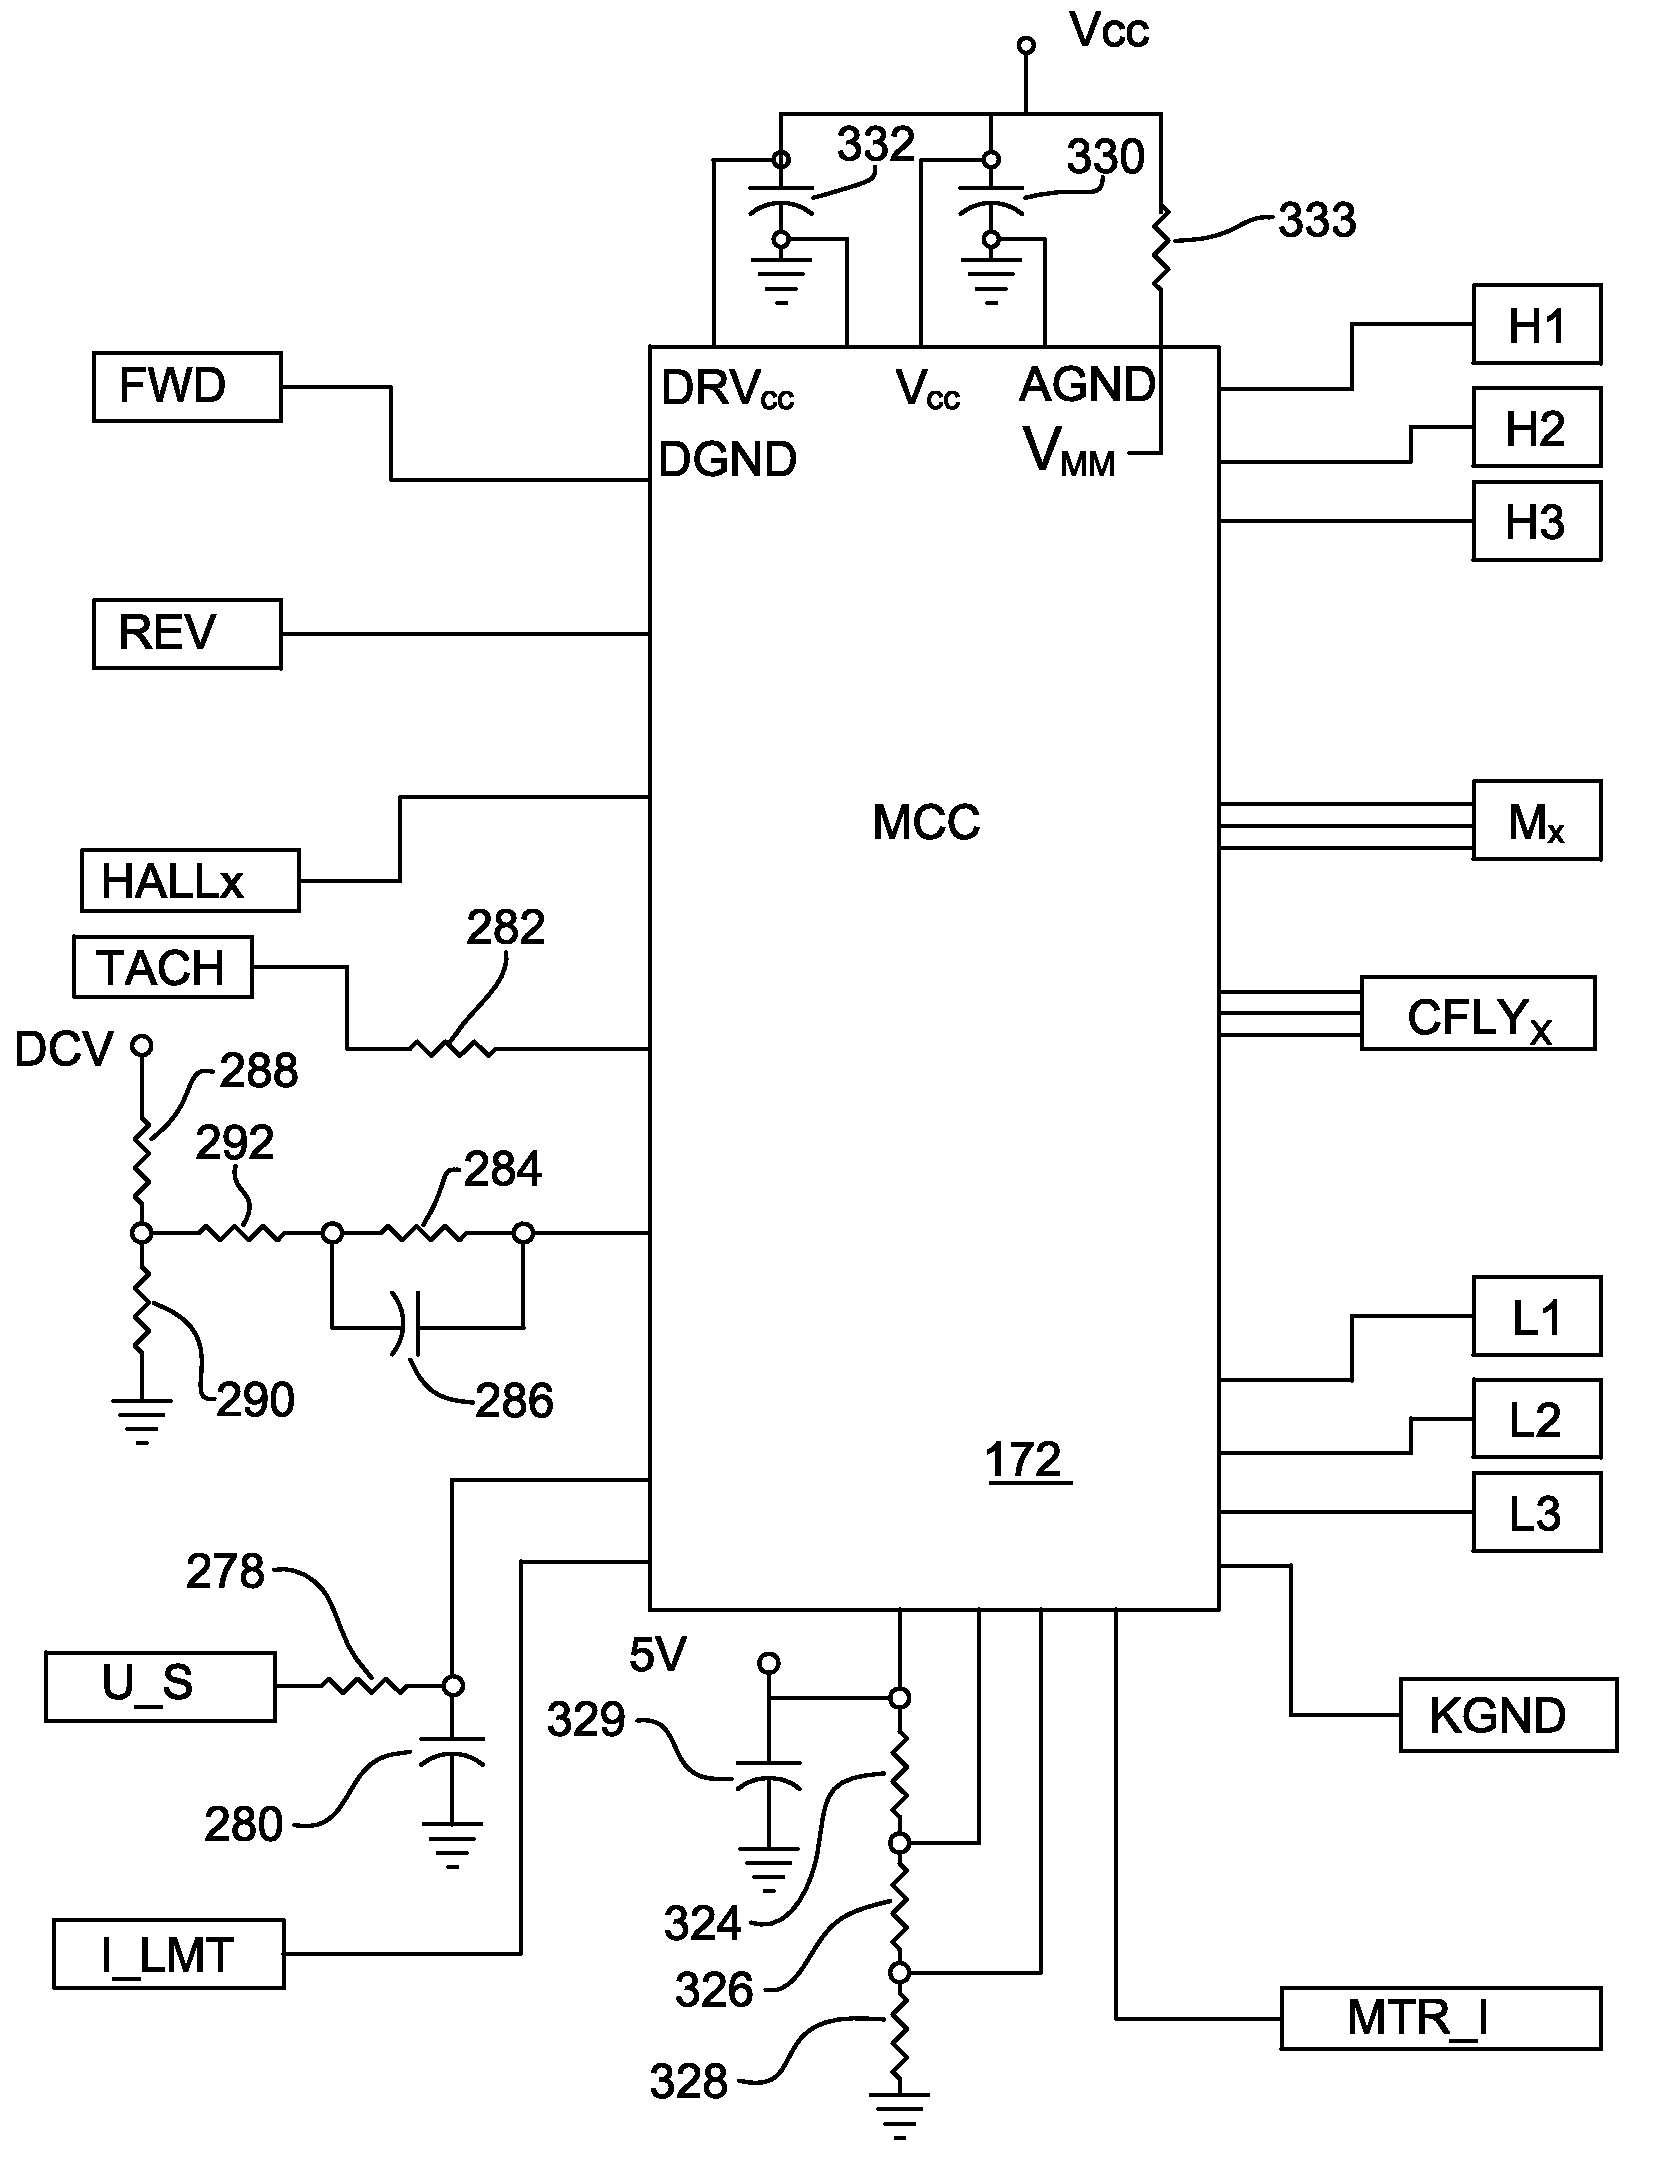 Powered surgical tool with control module that contains a sensor for remotely monitoring the tool power generating unit